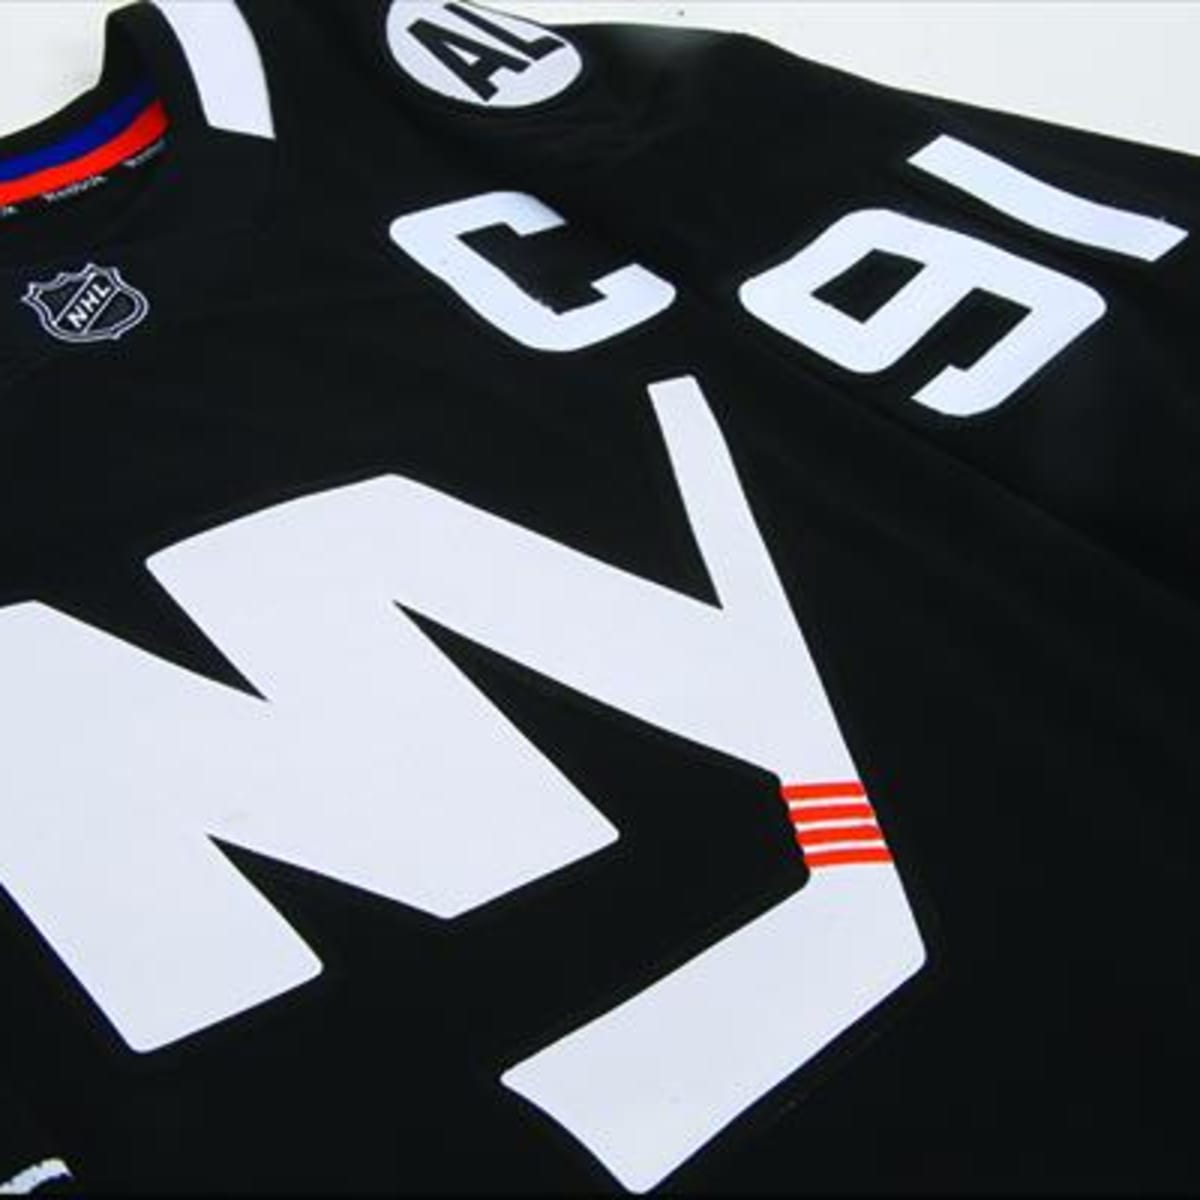 NY Islanders To Get A Black & White Brooklyn Jersey?